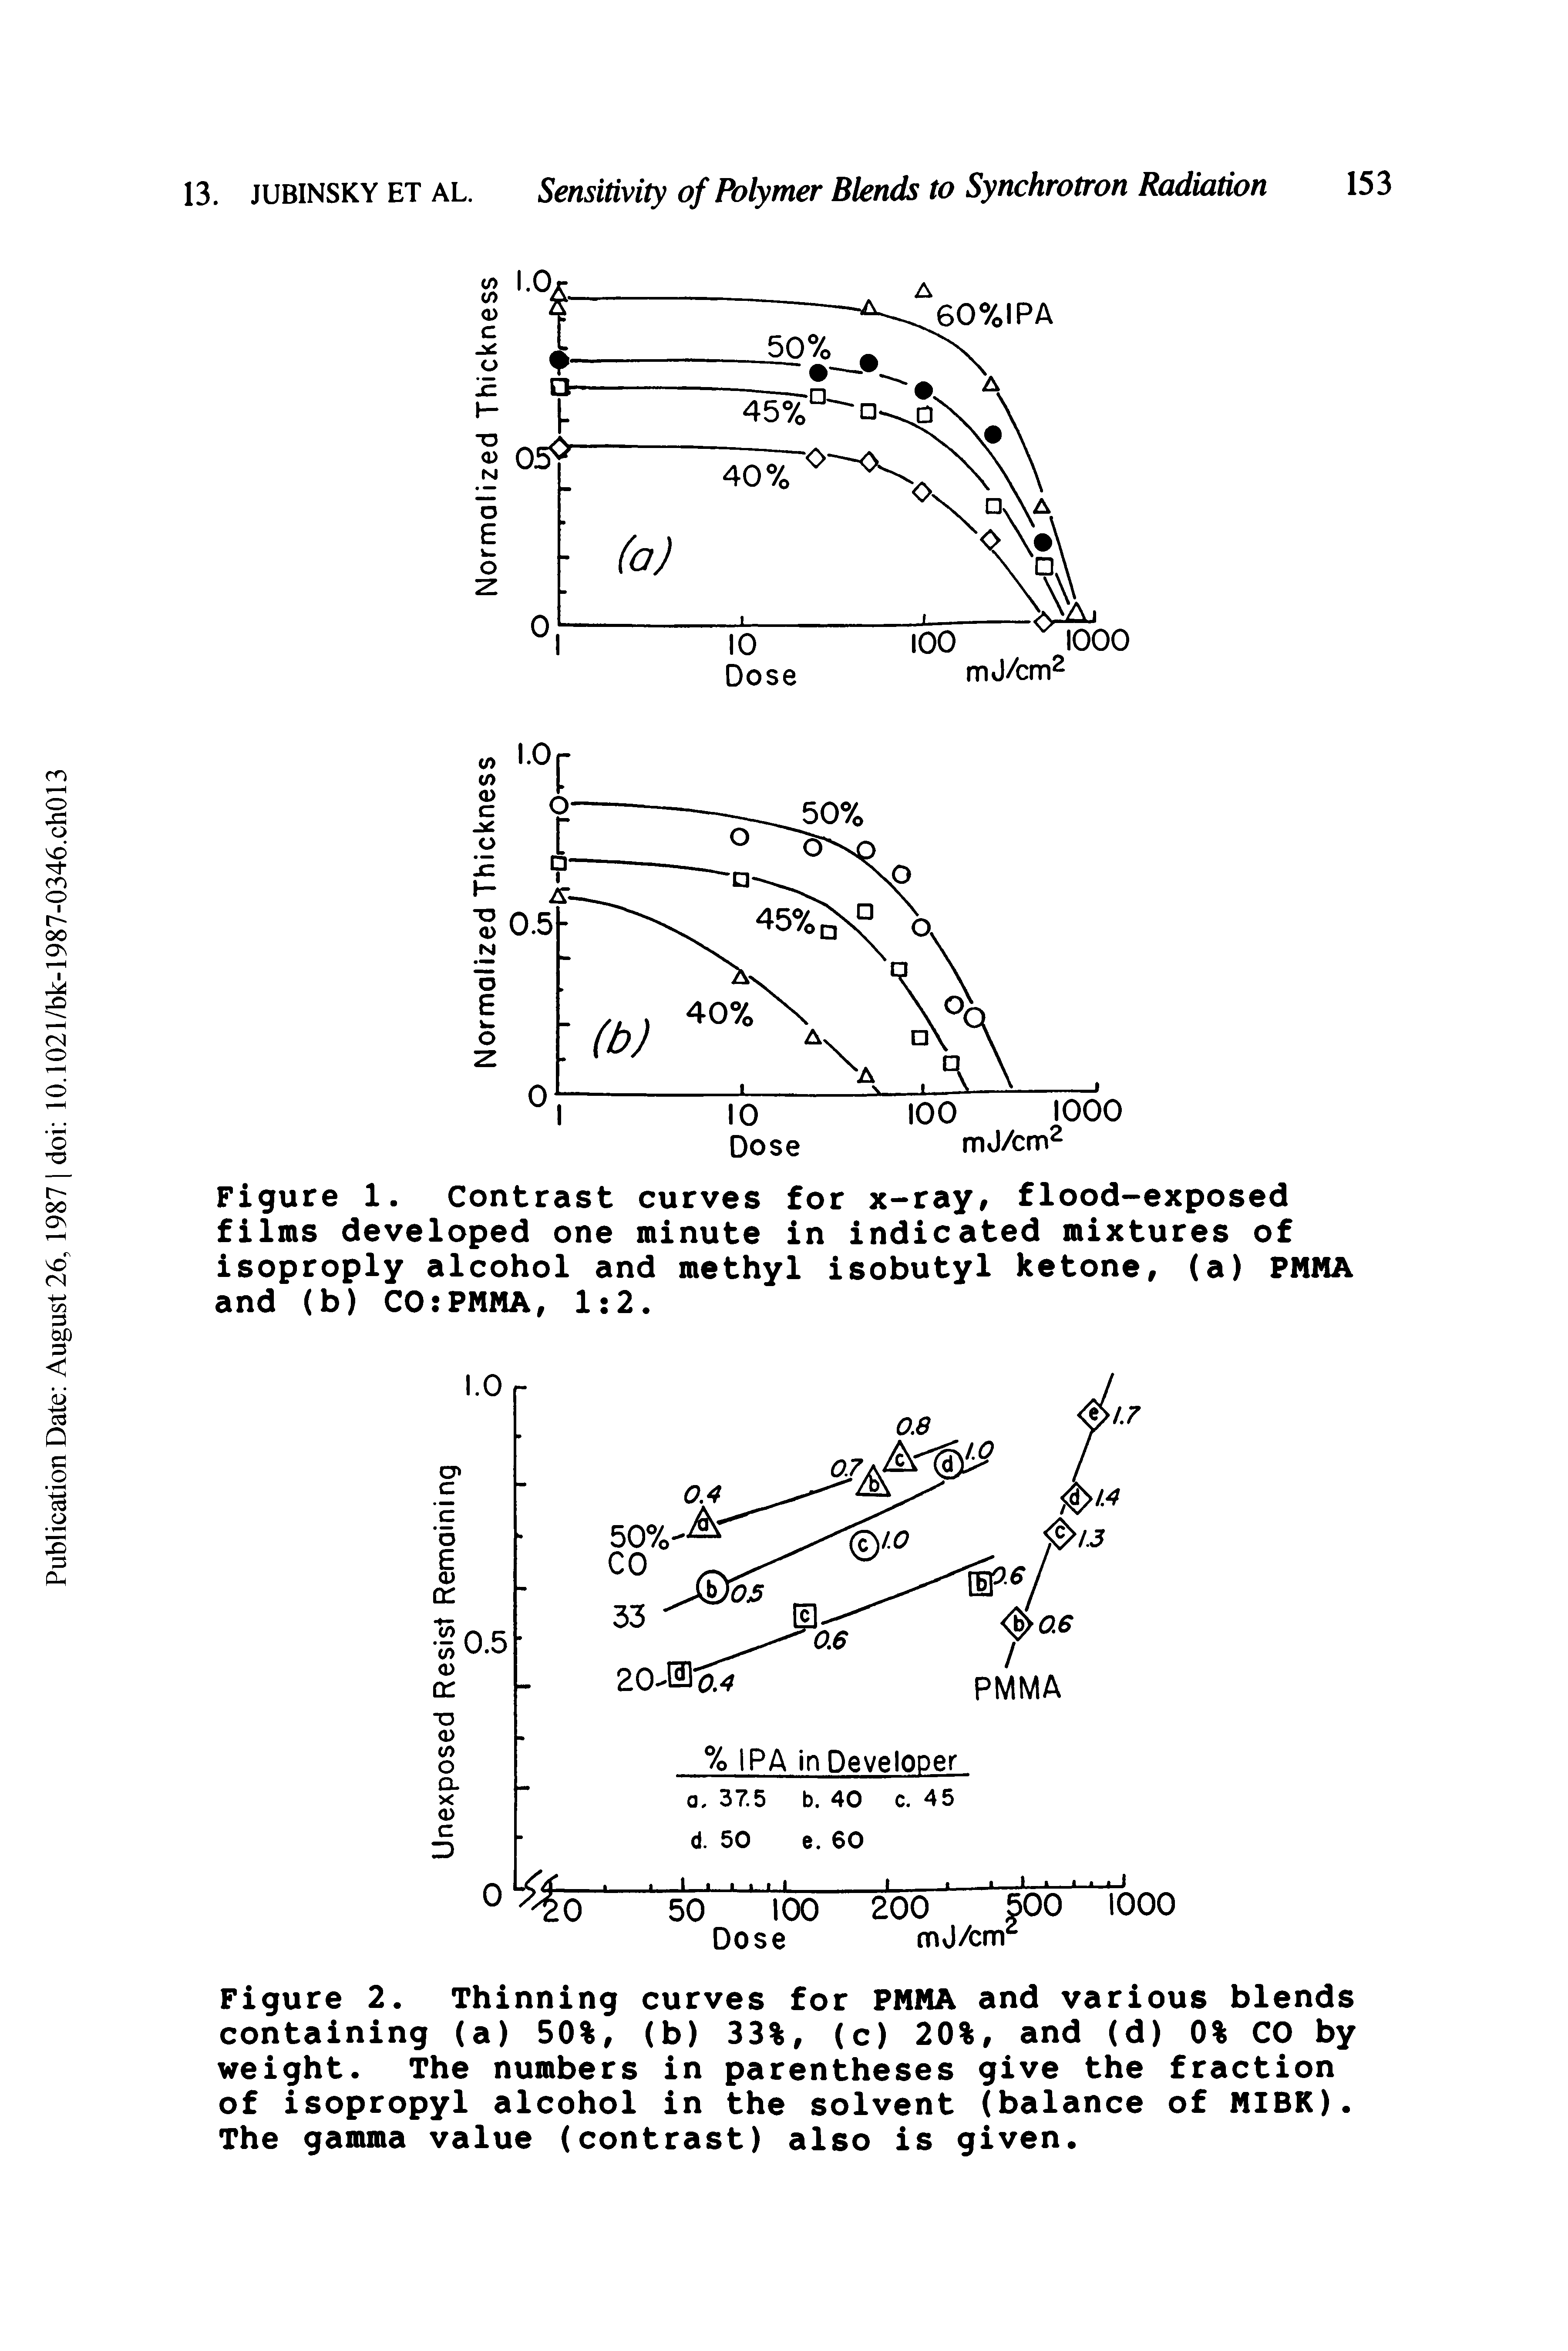 Figure 2. Thinning curves for PMMA and various blends containing (a) 50%, (b) 33%, (c) 20%, and (d) 0% CO by weight. The numbers in parentheses give the fraction of isopropyl alcohol in the solvent (balance of MIBK). The gamma value (contrast) also is given.